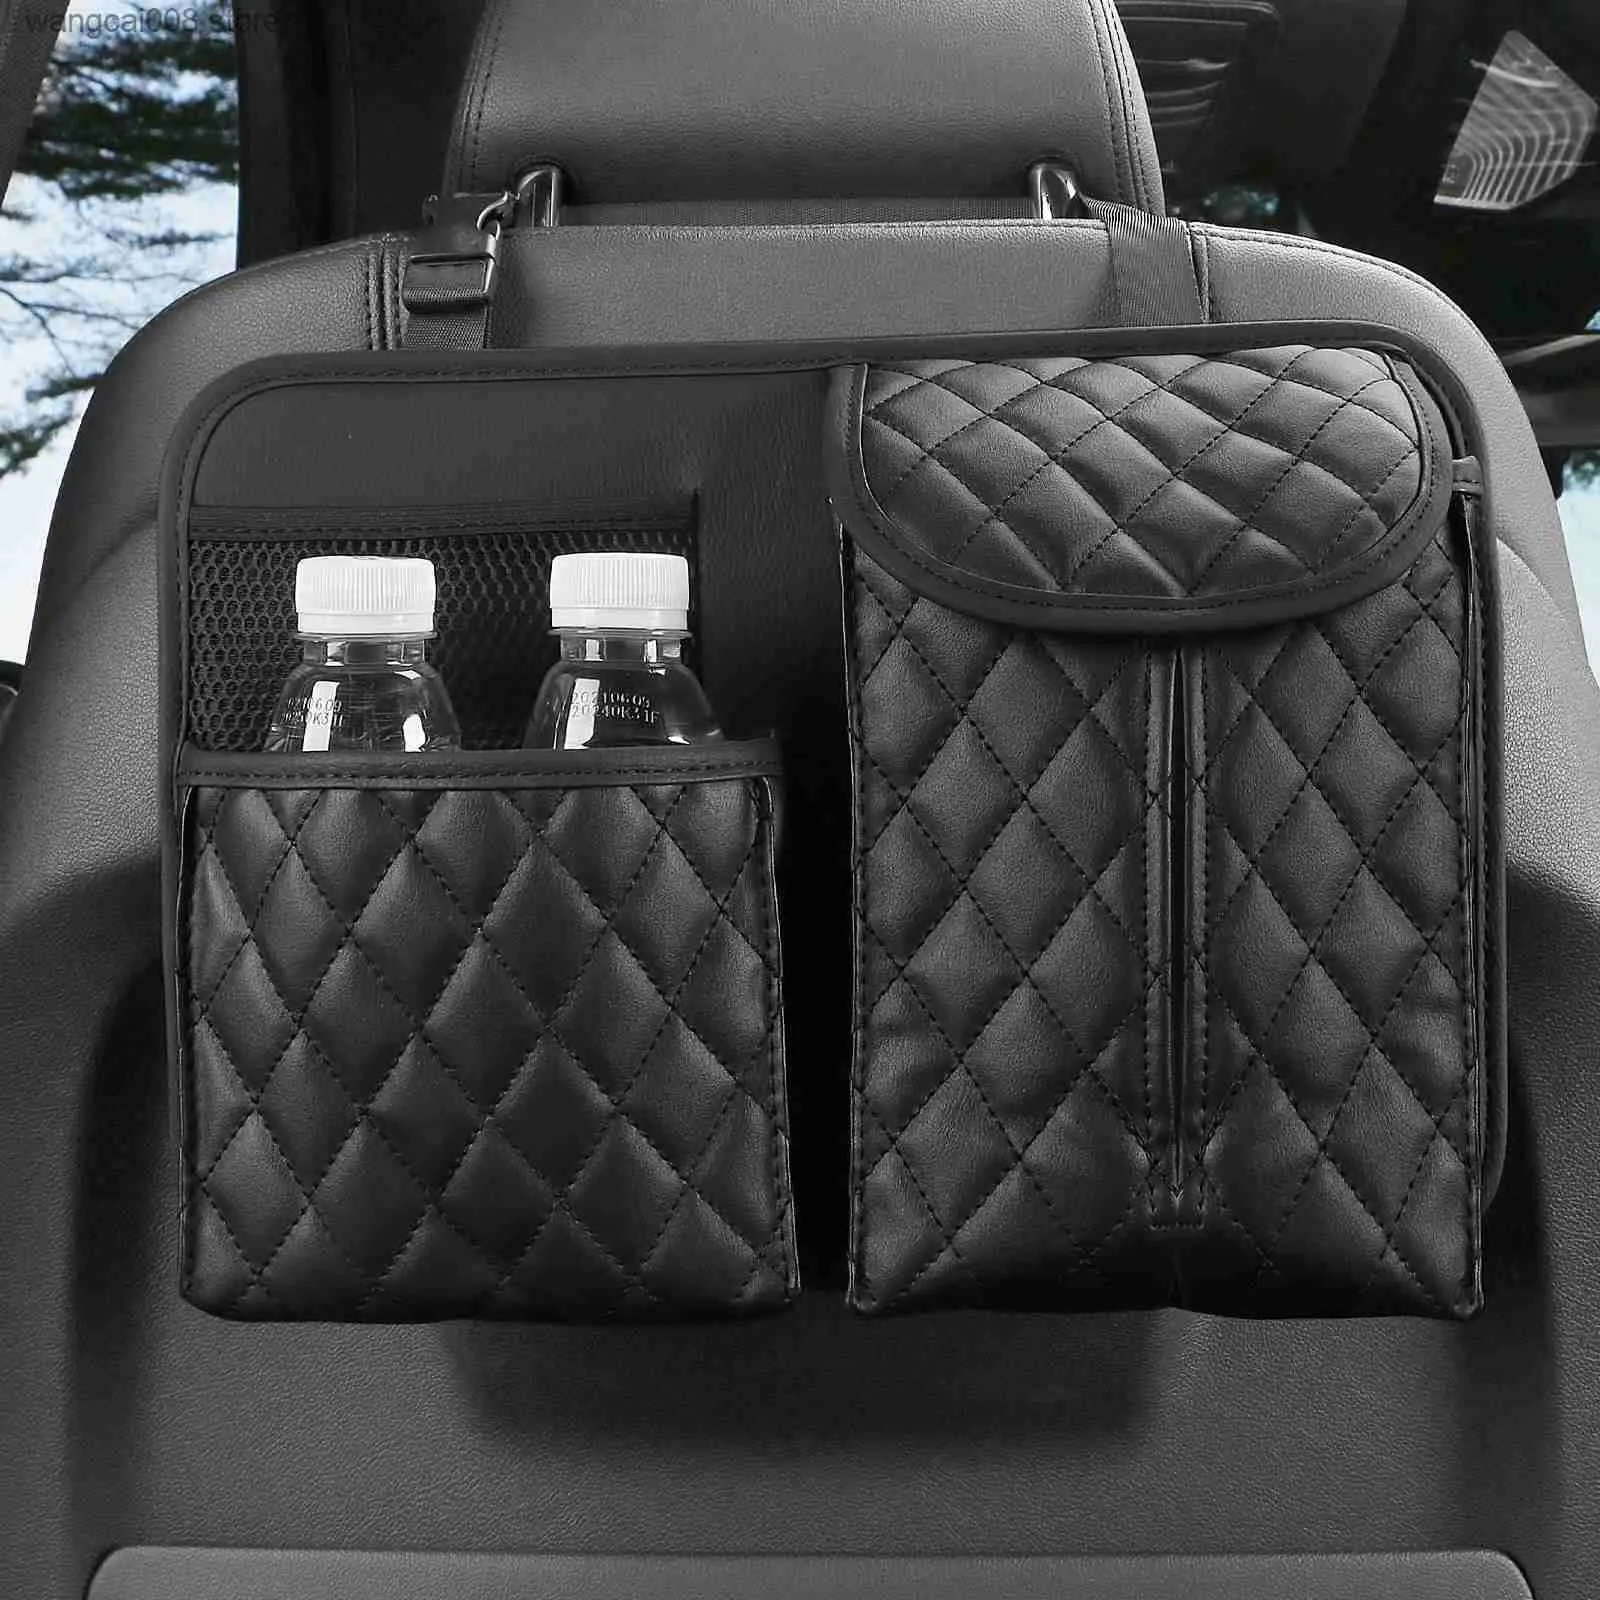 Universal Vehicle Tissue Box Holder With Seat Back Storage, Cup Holder, And  Tidying Pocket Leather Organizer Bag For Car Accessories And Interior  Stowing T230718 From Wangcai008, $1.24